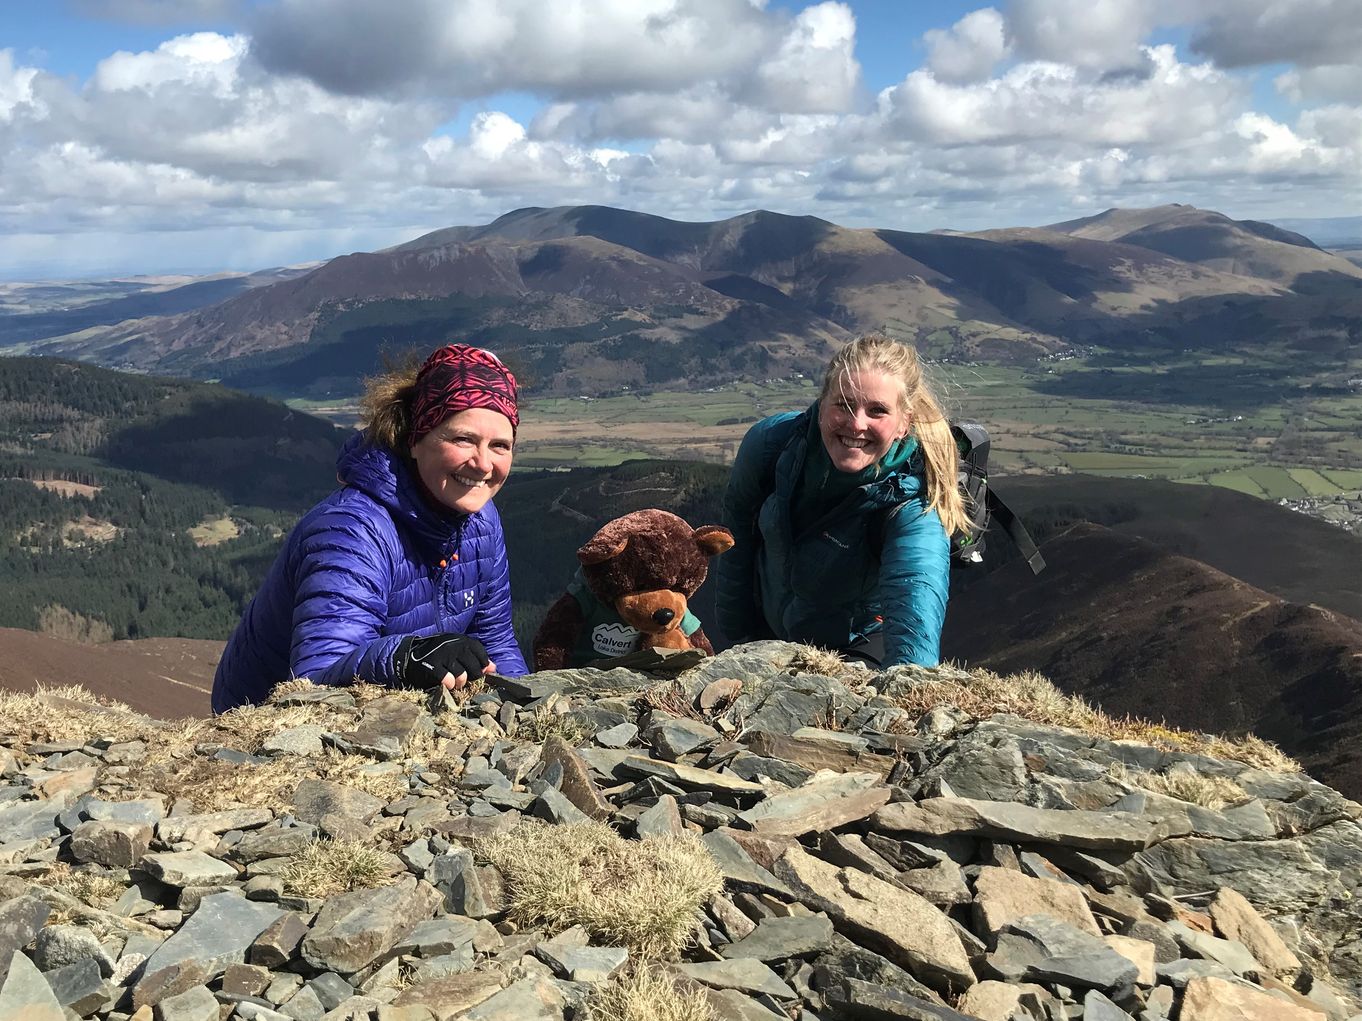 Helen Hunt, (who has planned, set up and will lead the Rotary 5 Peaks Challenge), together with Rosie Cumella , a member of the Calvert Lakes Fund raising staff, and also in the challenge team, on a training exercise with Calvert Bear 